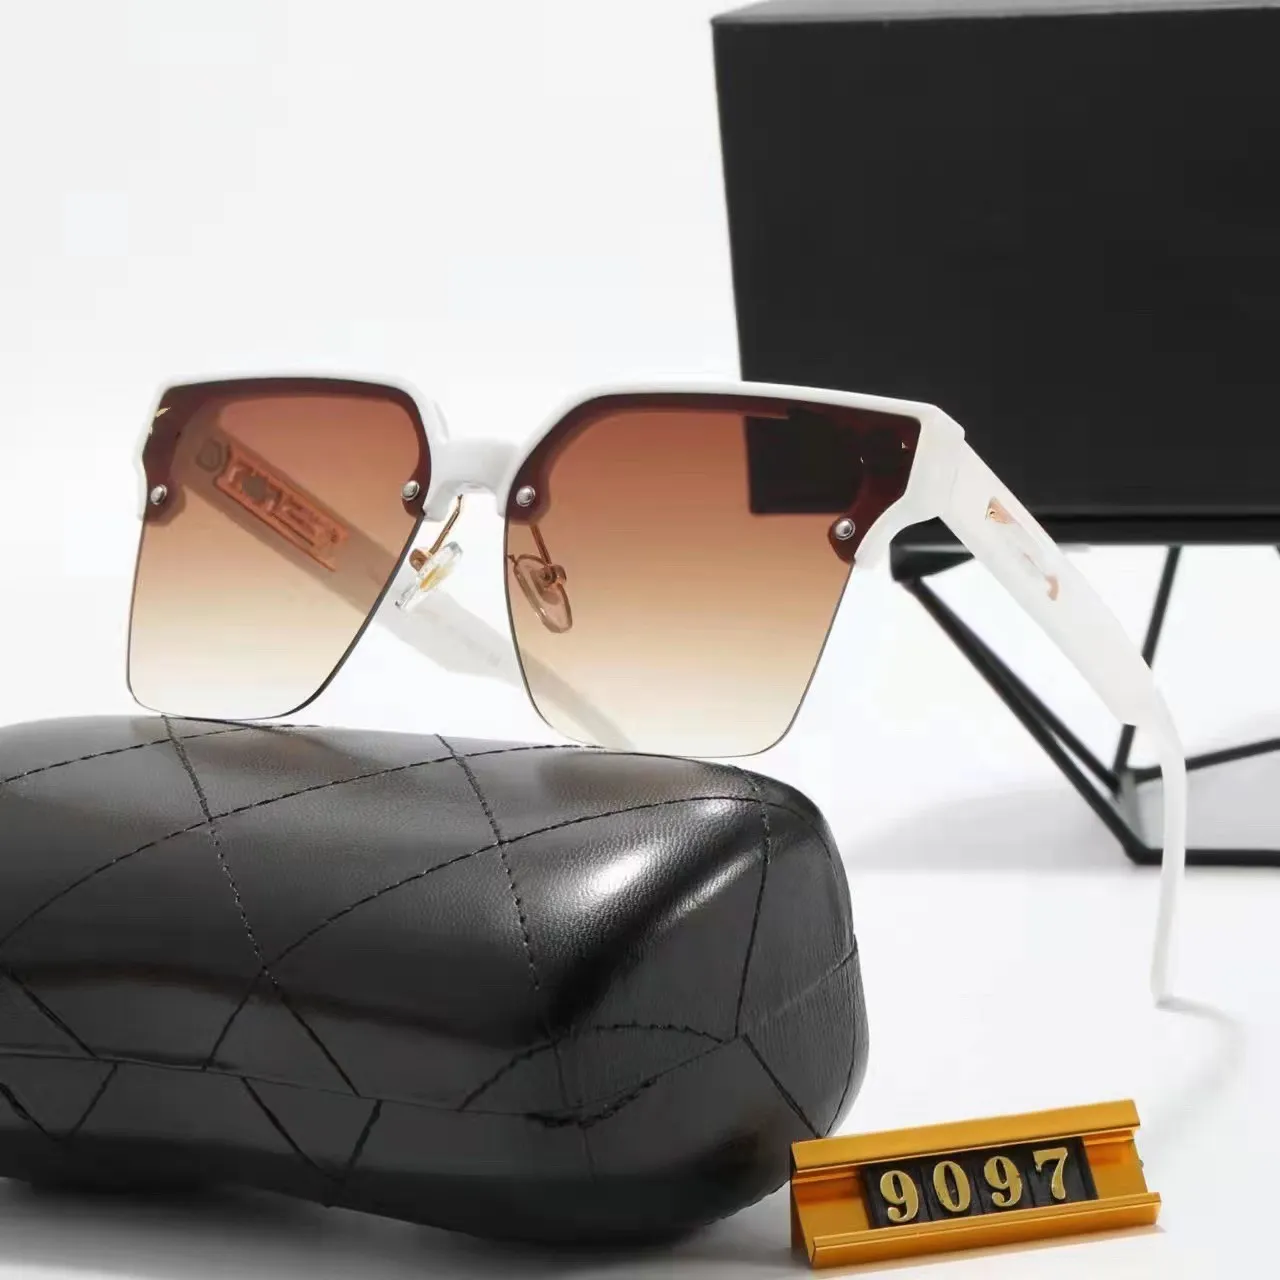 Sunglasses For Round Face - Buy Sunglasses For Round Face online at Best  Prices in India | Flipkart.com